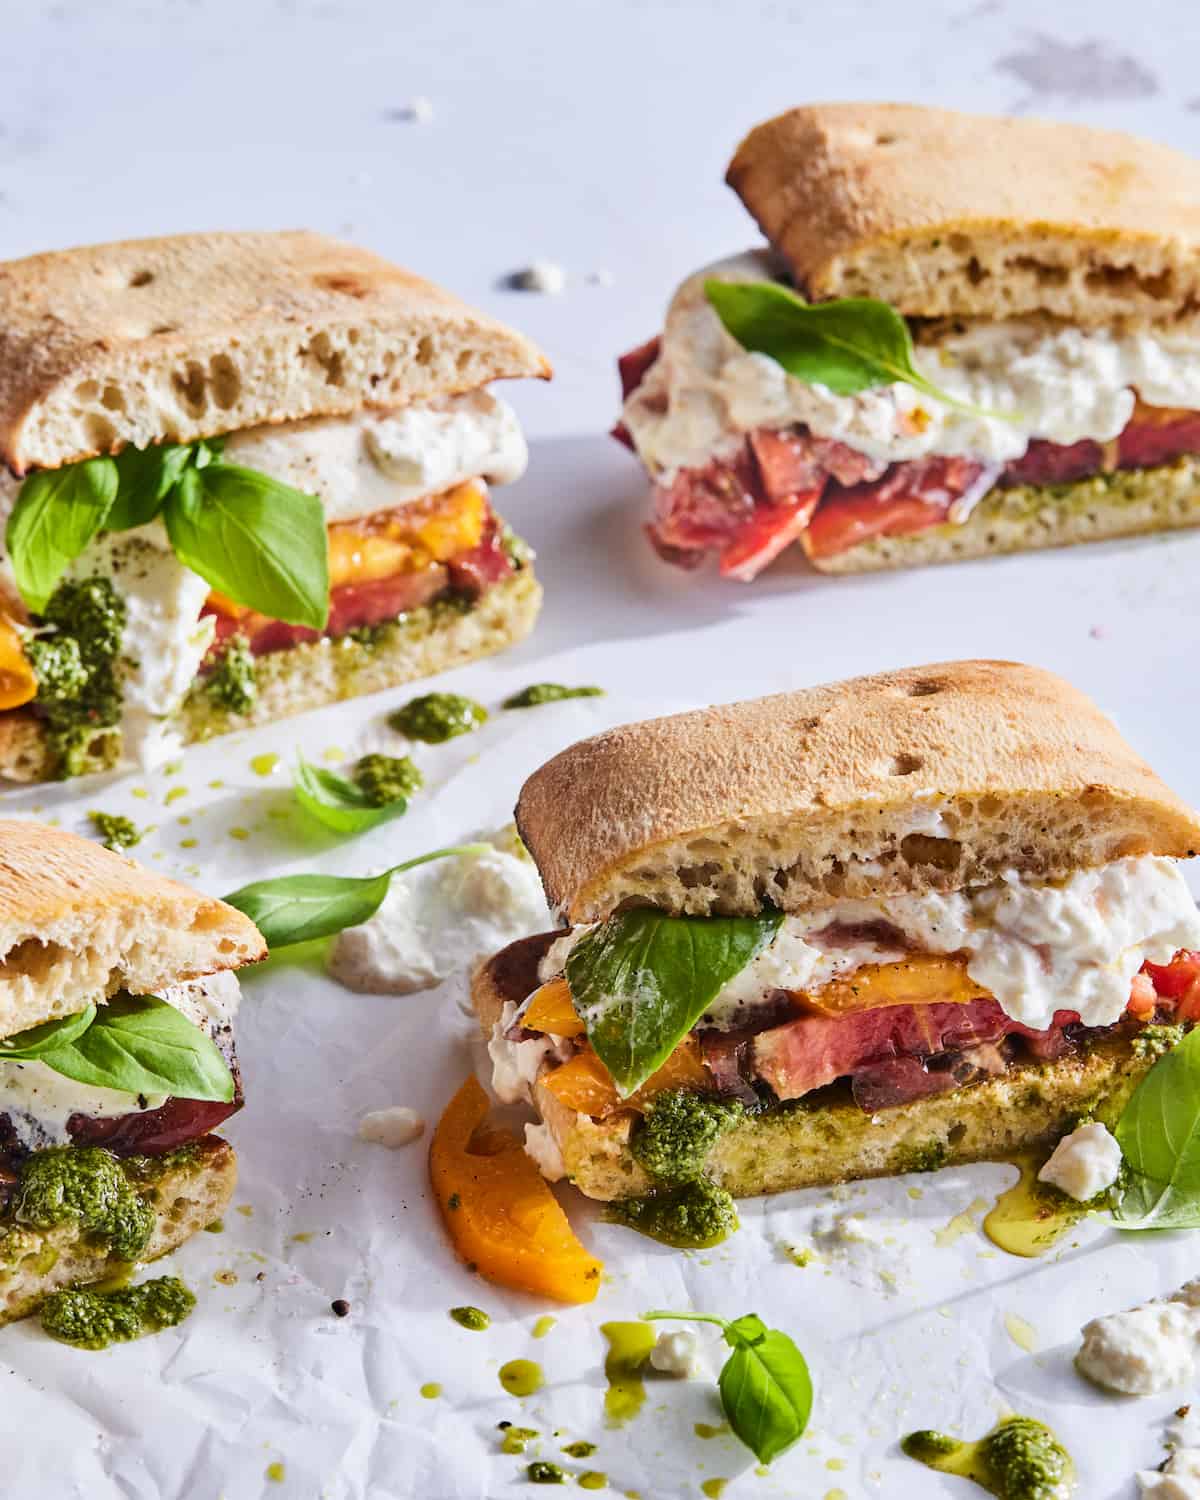 Burrata Caprese Sandwich with toasted bread, large chunks of burrata, fresh summer tomatoes and a LOT of pesto